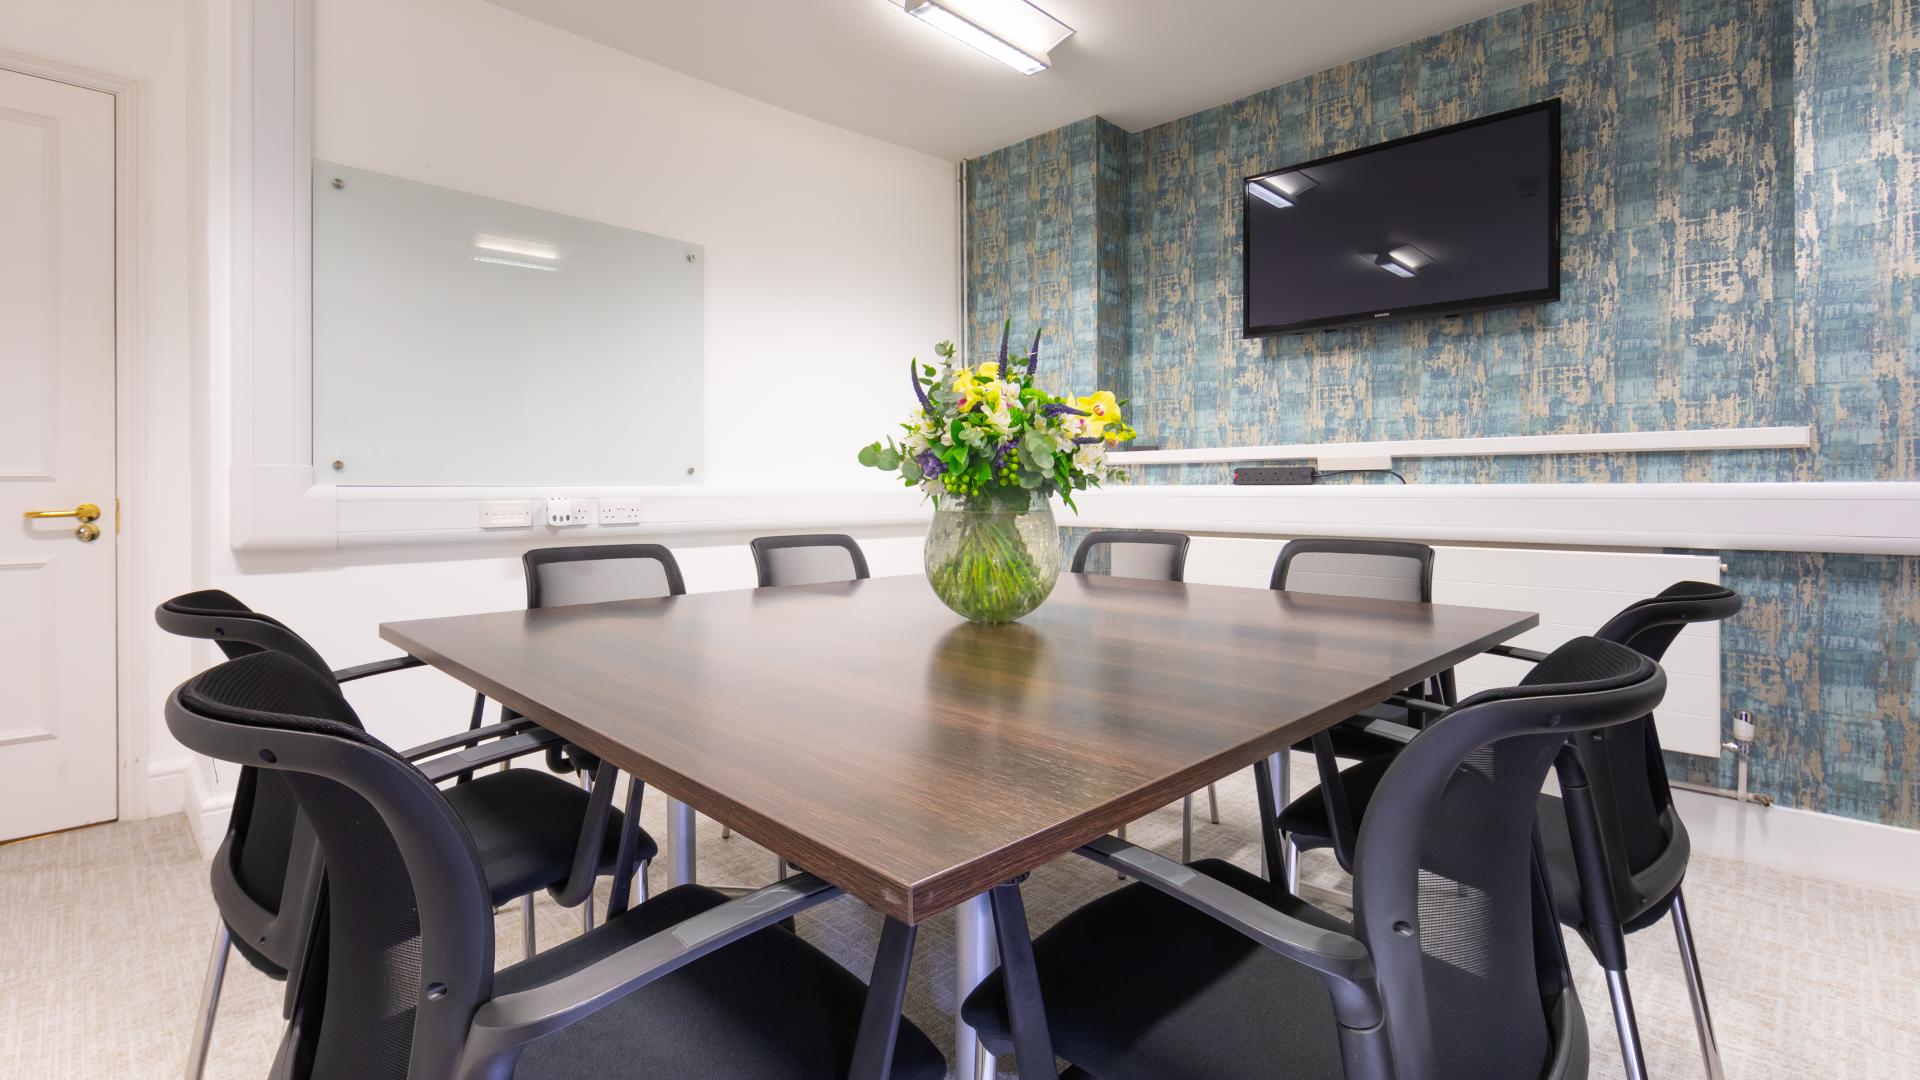 Meeting Rooms for Hire in Marylebone, London